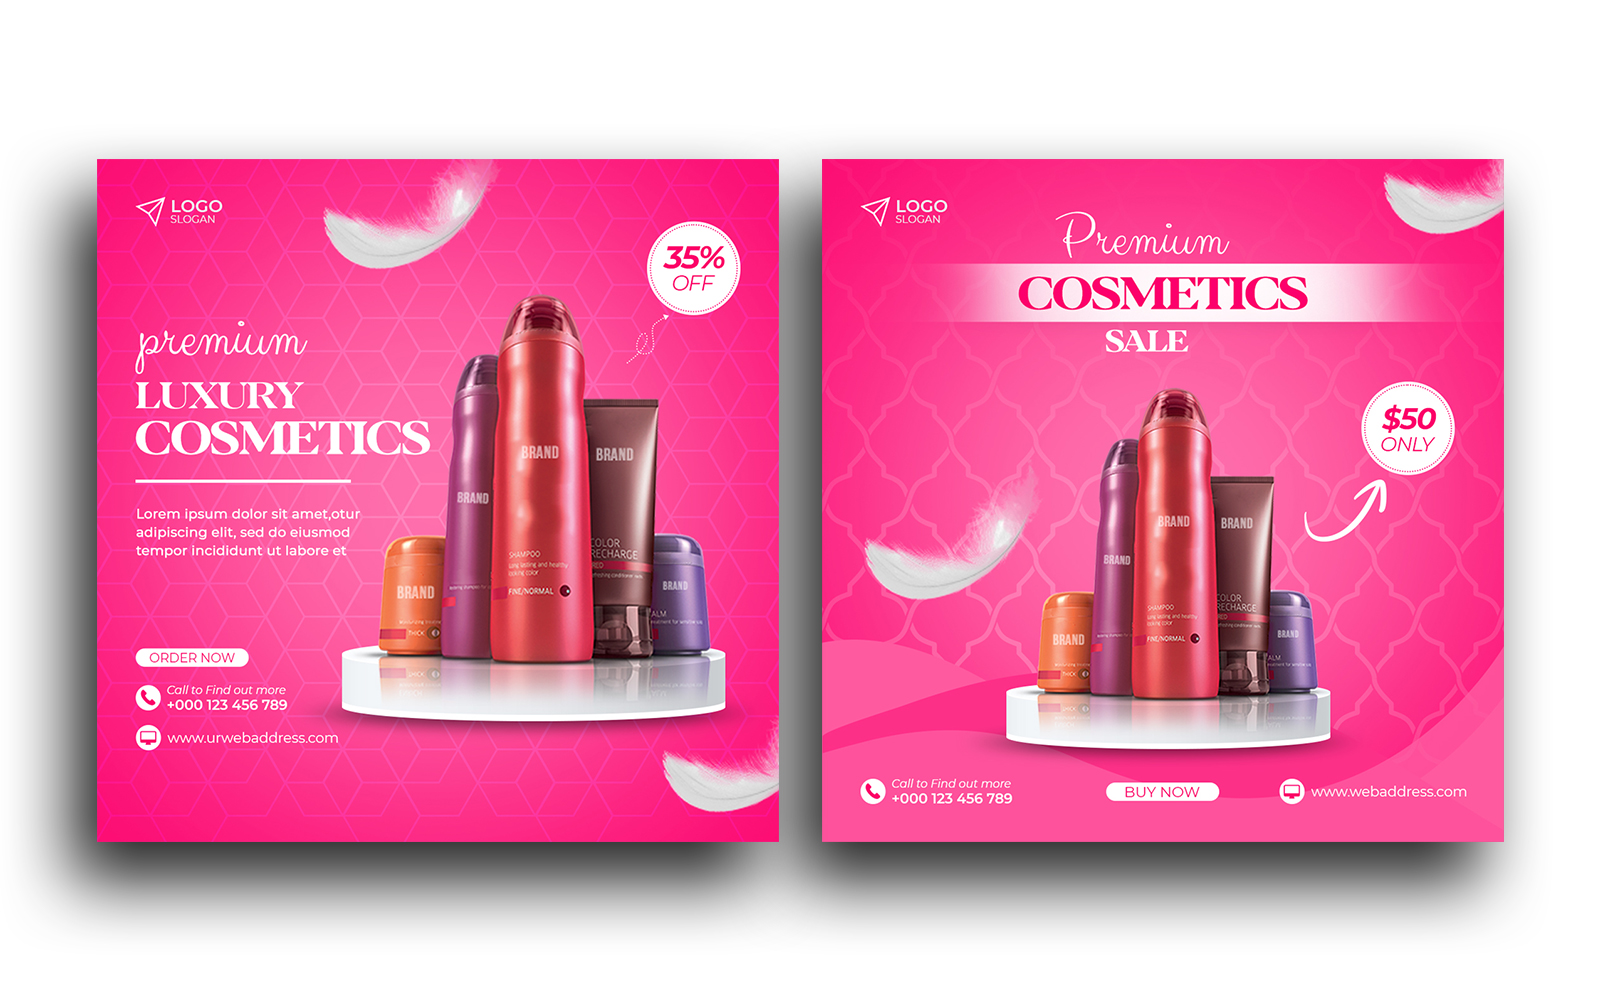 Cosmetics sale beauty products sale social media post banner template